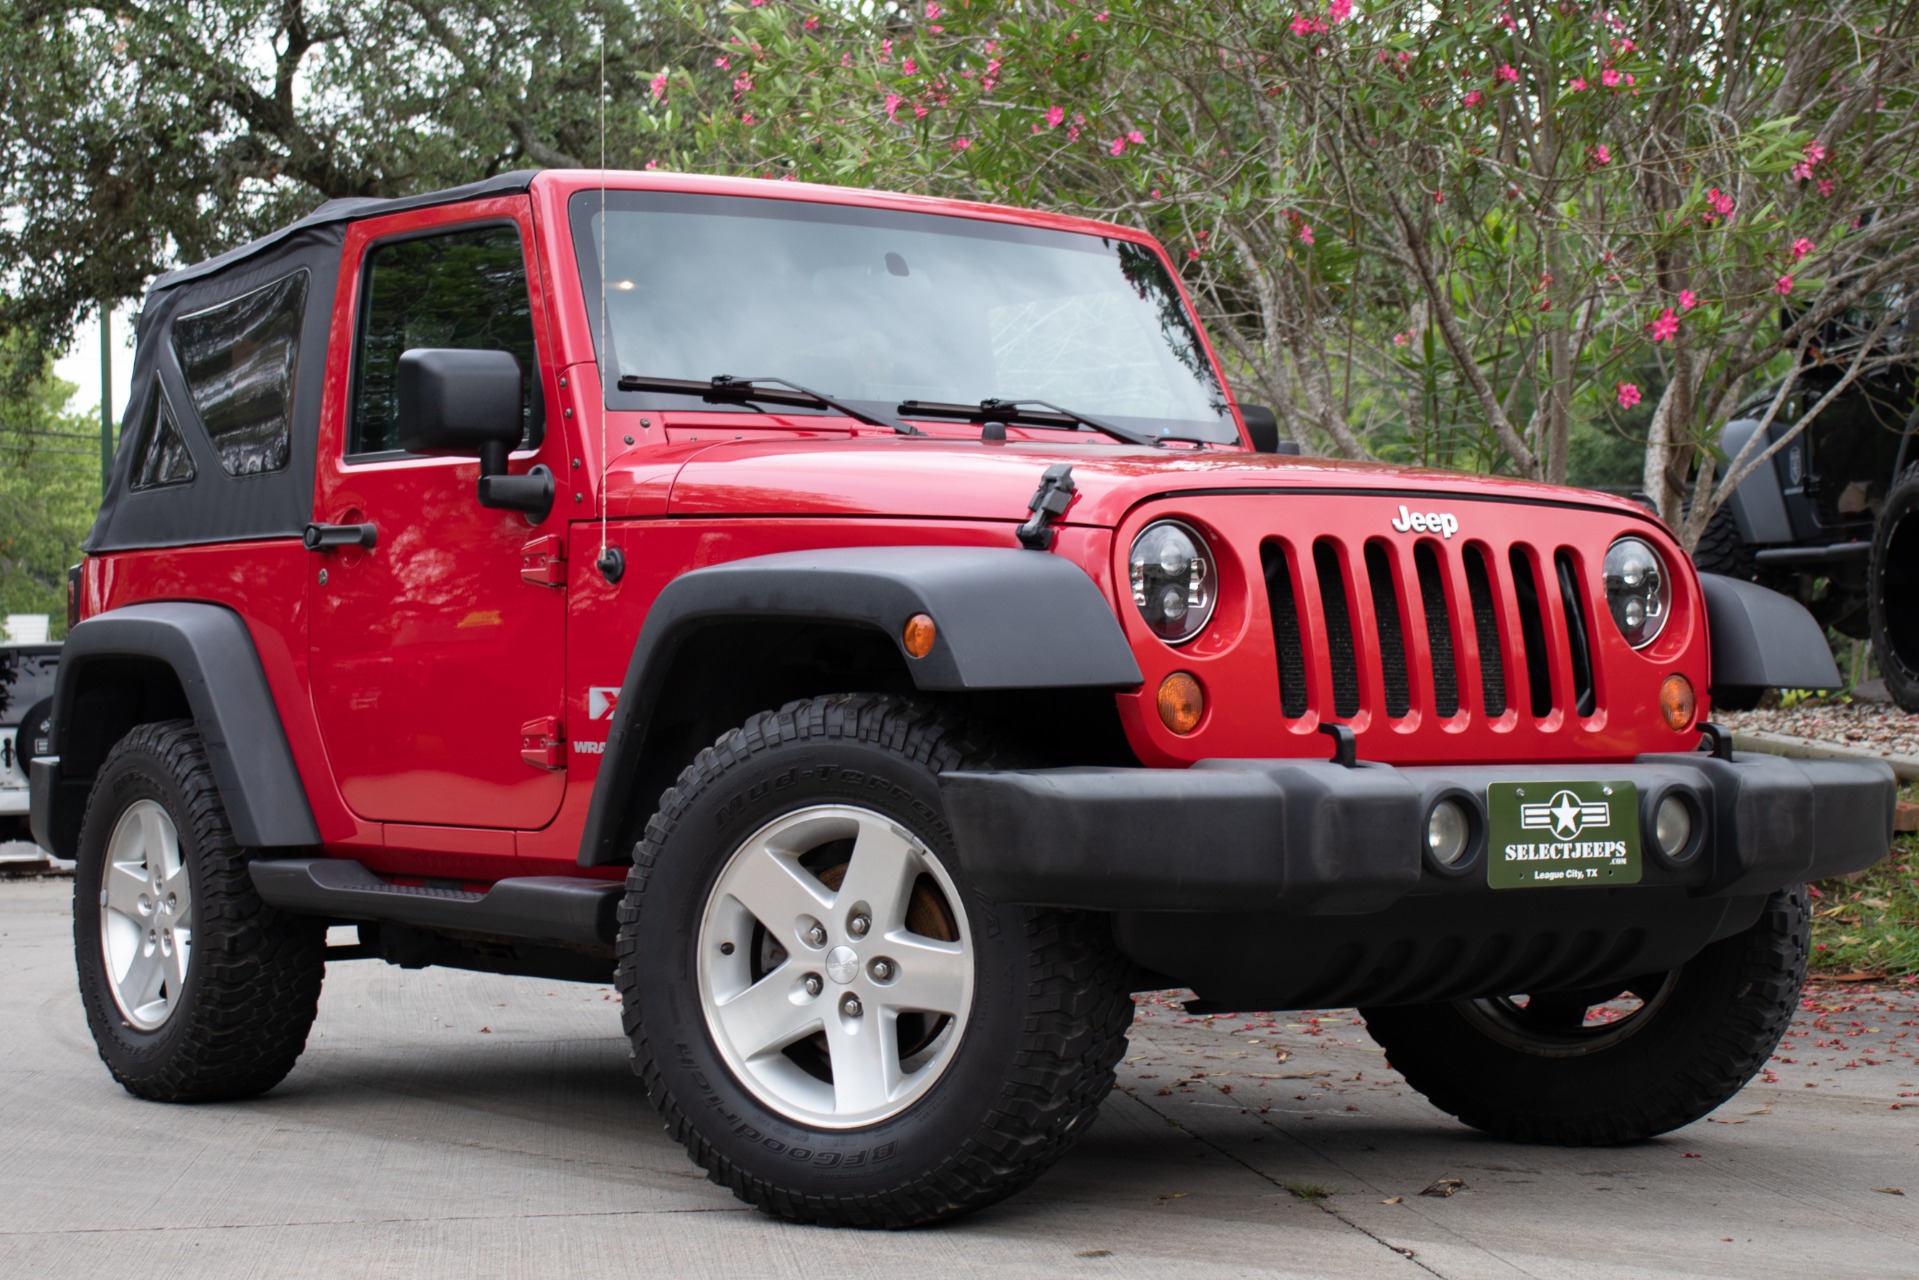 Used 2007 Jeep Wrangler X For Sale ($11,995) | Select Jeeps Inc. Stock  #115349